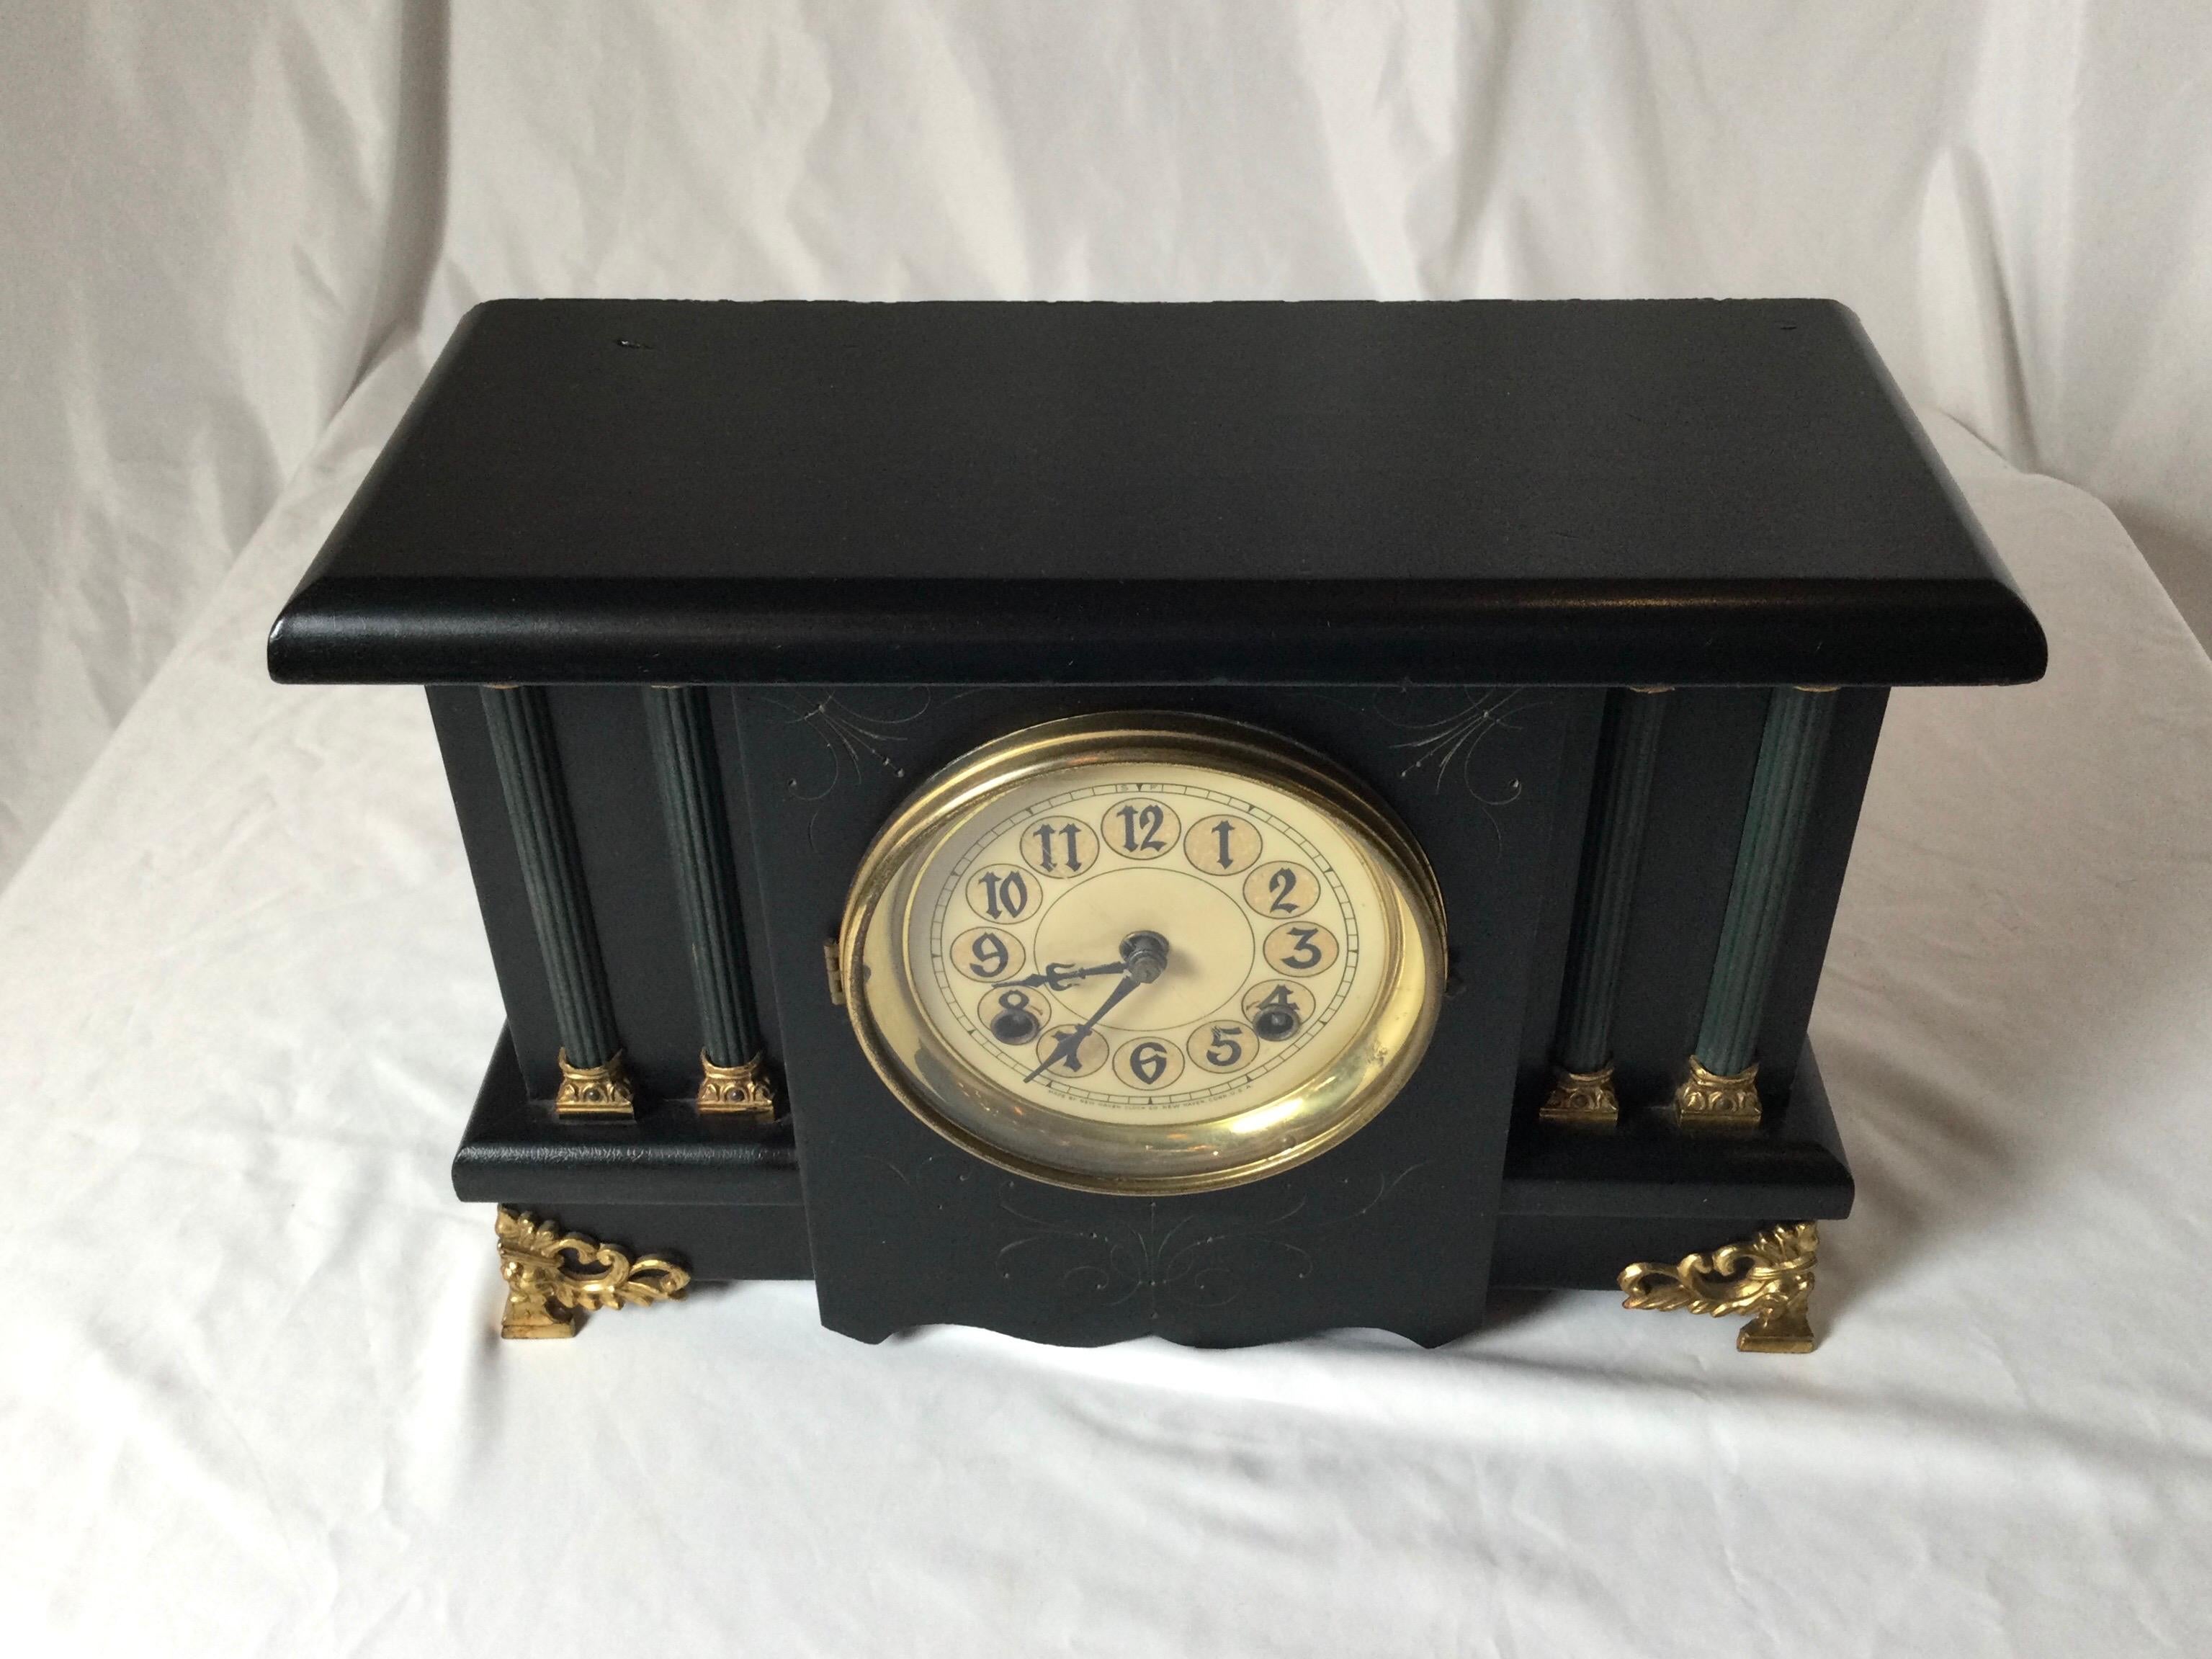 Neoclassical back wood mantle clock. Strikes on hour and half hour with a deep resounding gong. With key and pendulum. Working order but clocks may need adjustment after shipping.